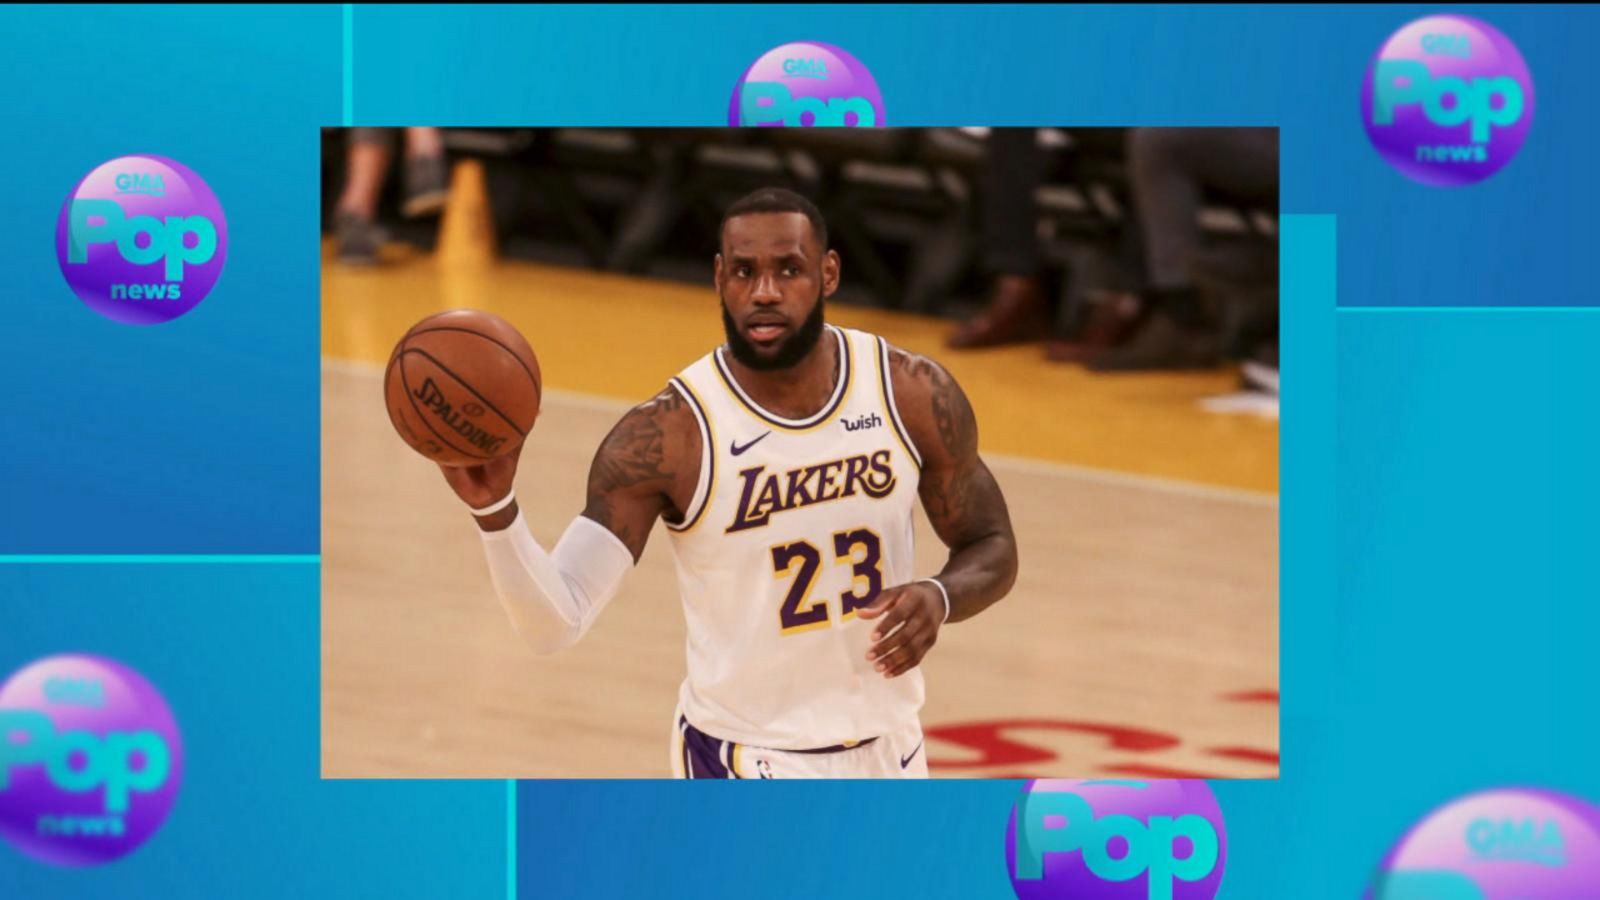 LeBron James plays a high-stakes basketball game in the trailer